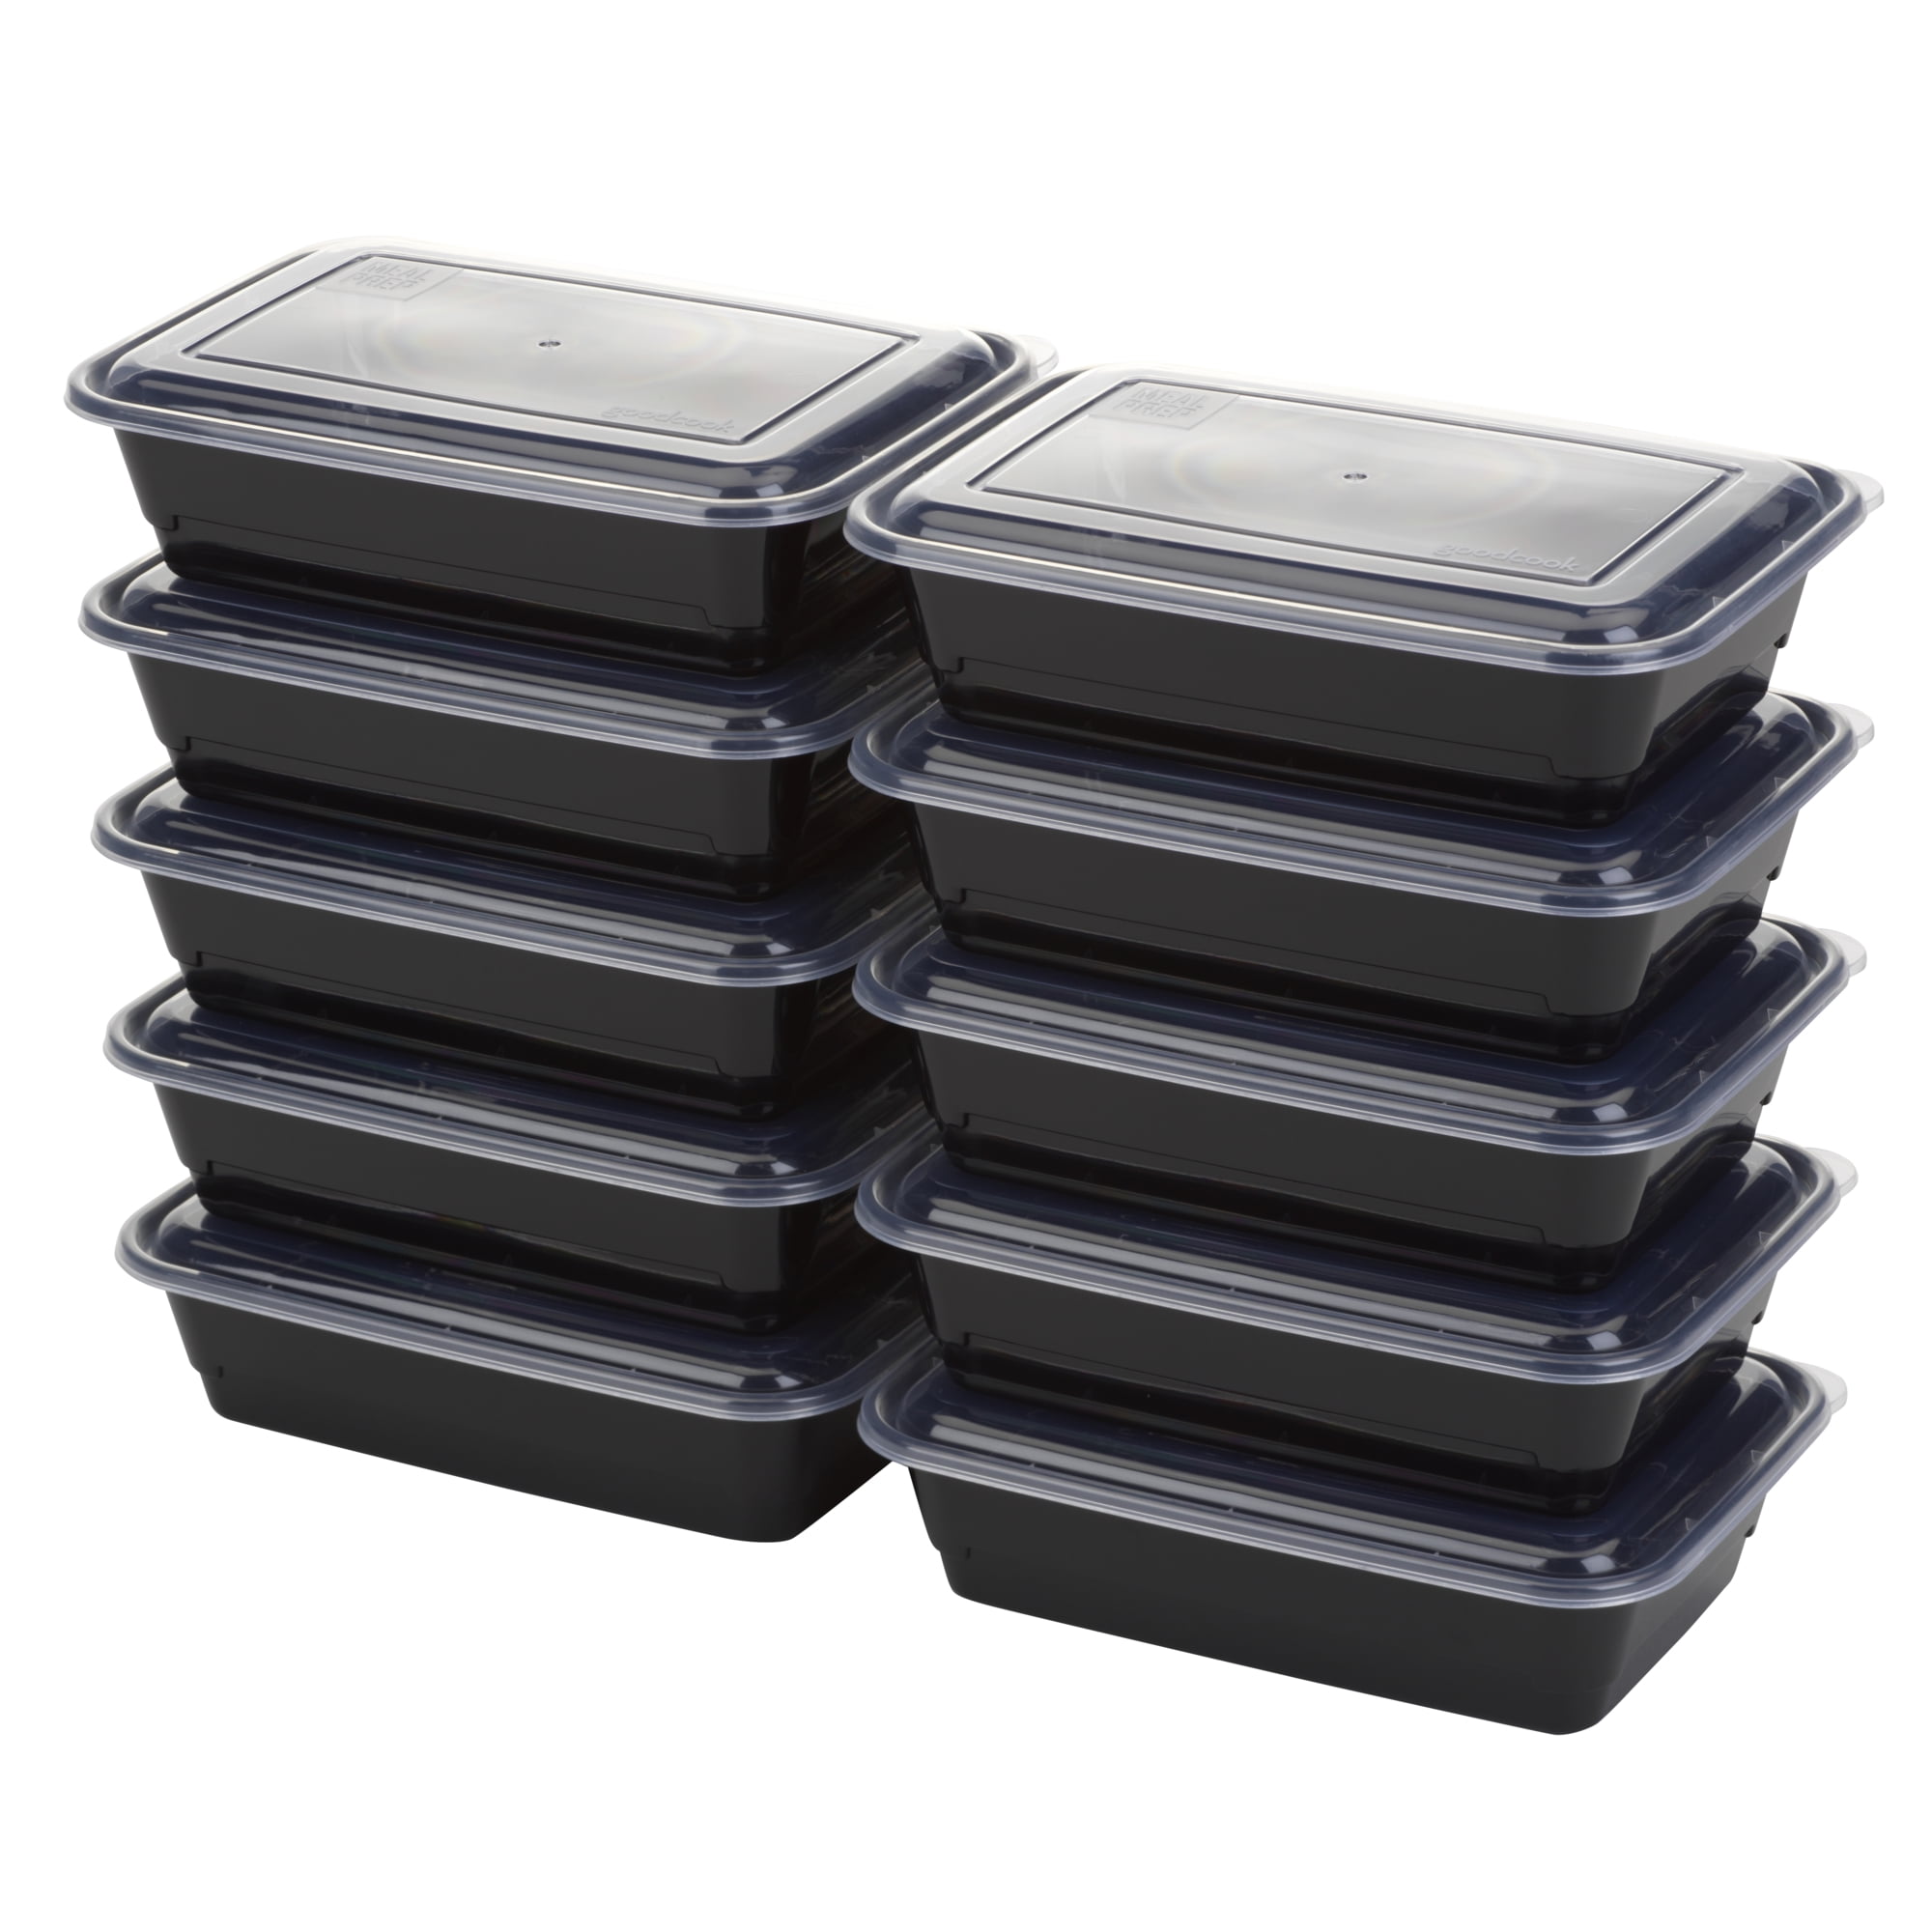 GoodCook Meal Prep Set Food Storage Containers with Lids - 60pc in